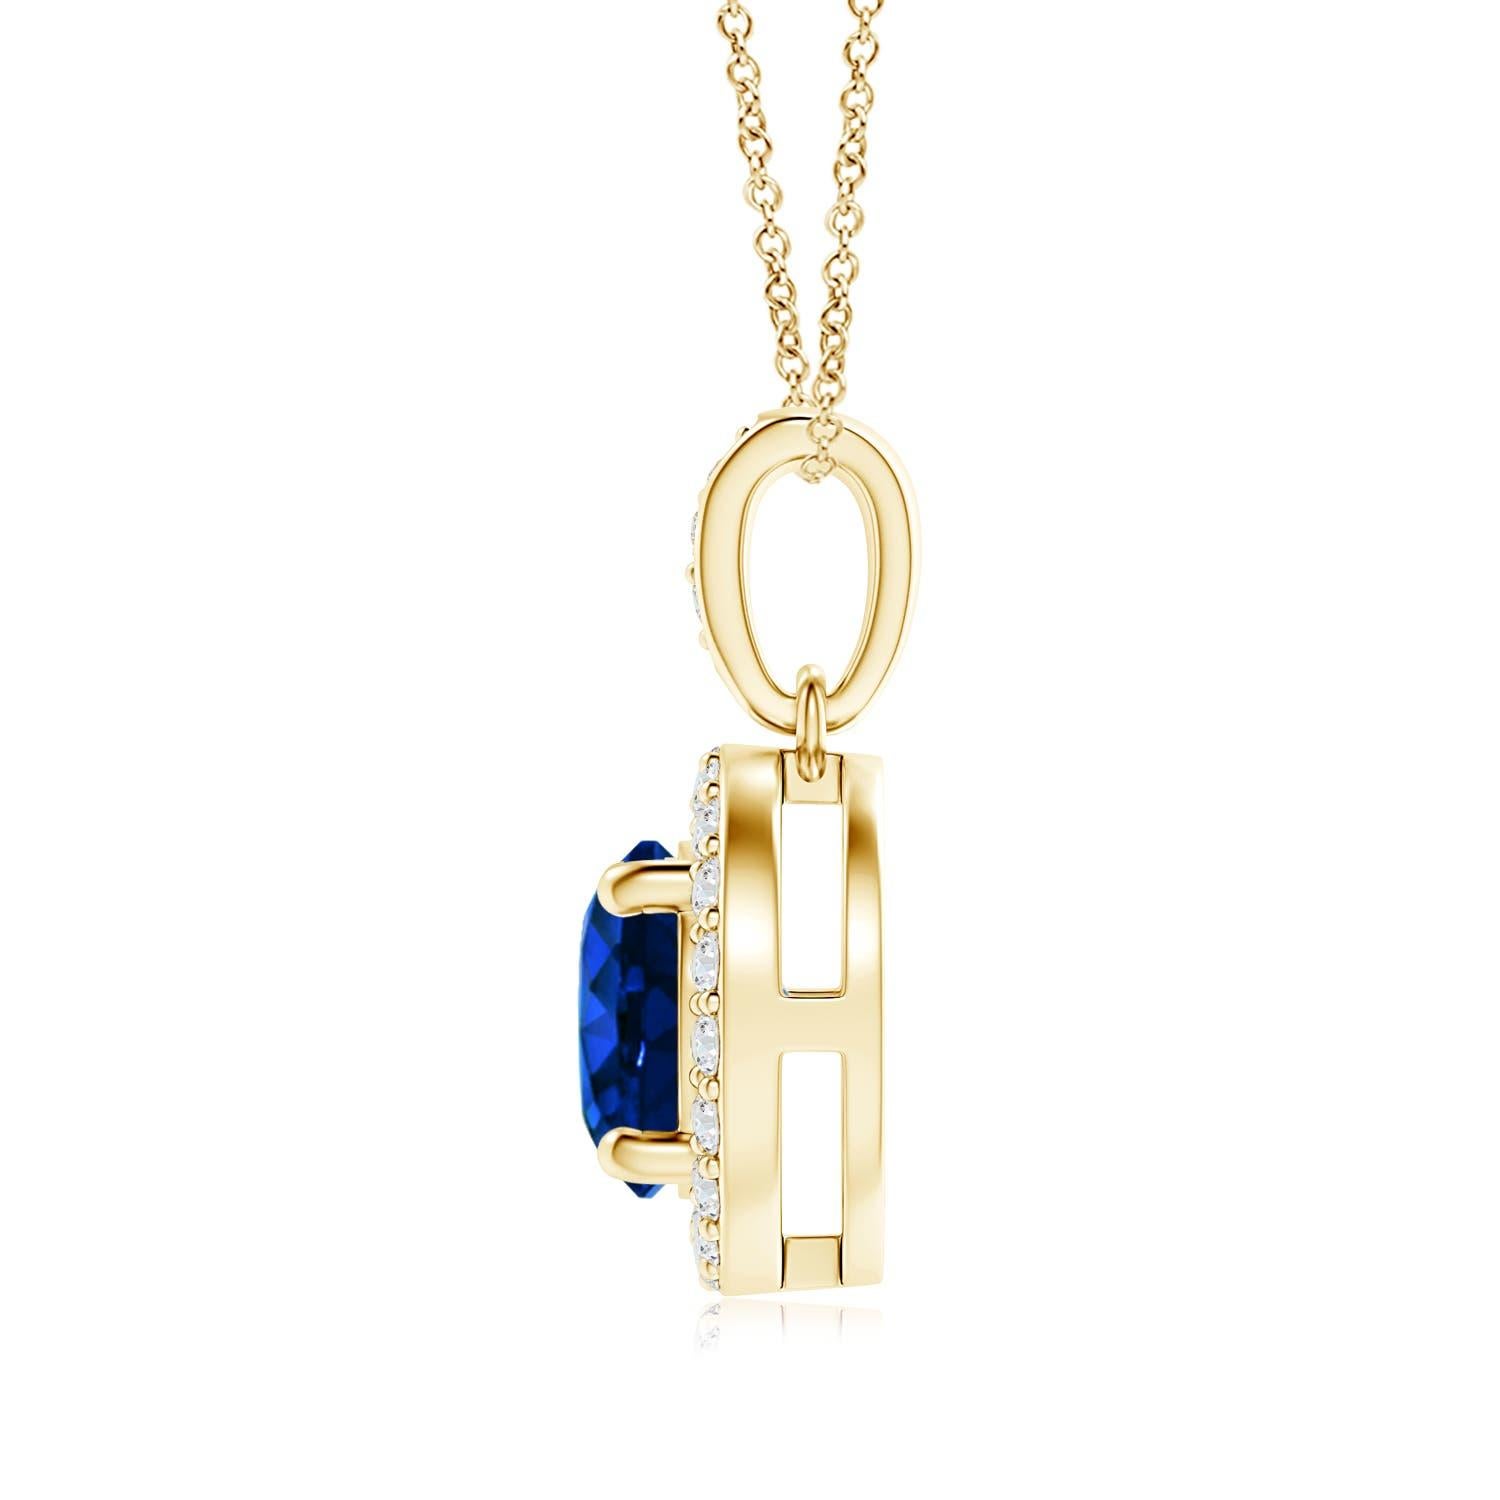 The GIA certified round blue sapphire is held in a prong setting and appears to be floating amid a dazzling diamond halo. There are additional diamond accents on the bale that elevate the elegant look of this 18K Yellow Gold pendant.
